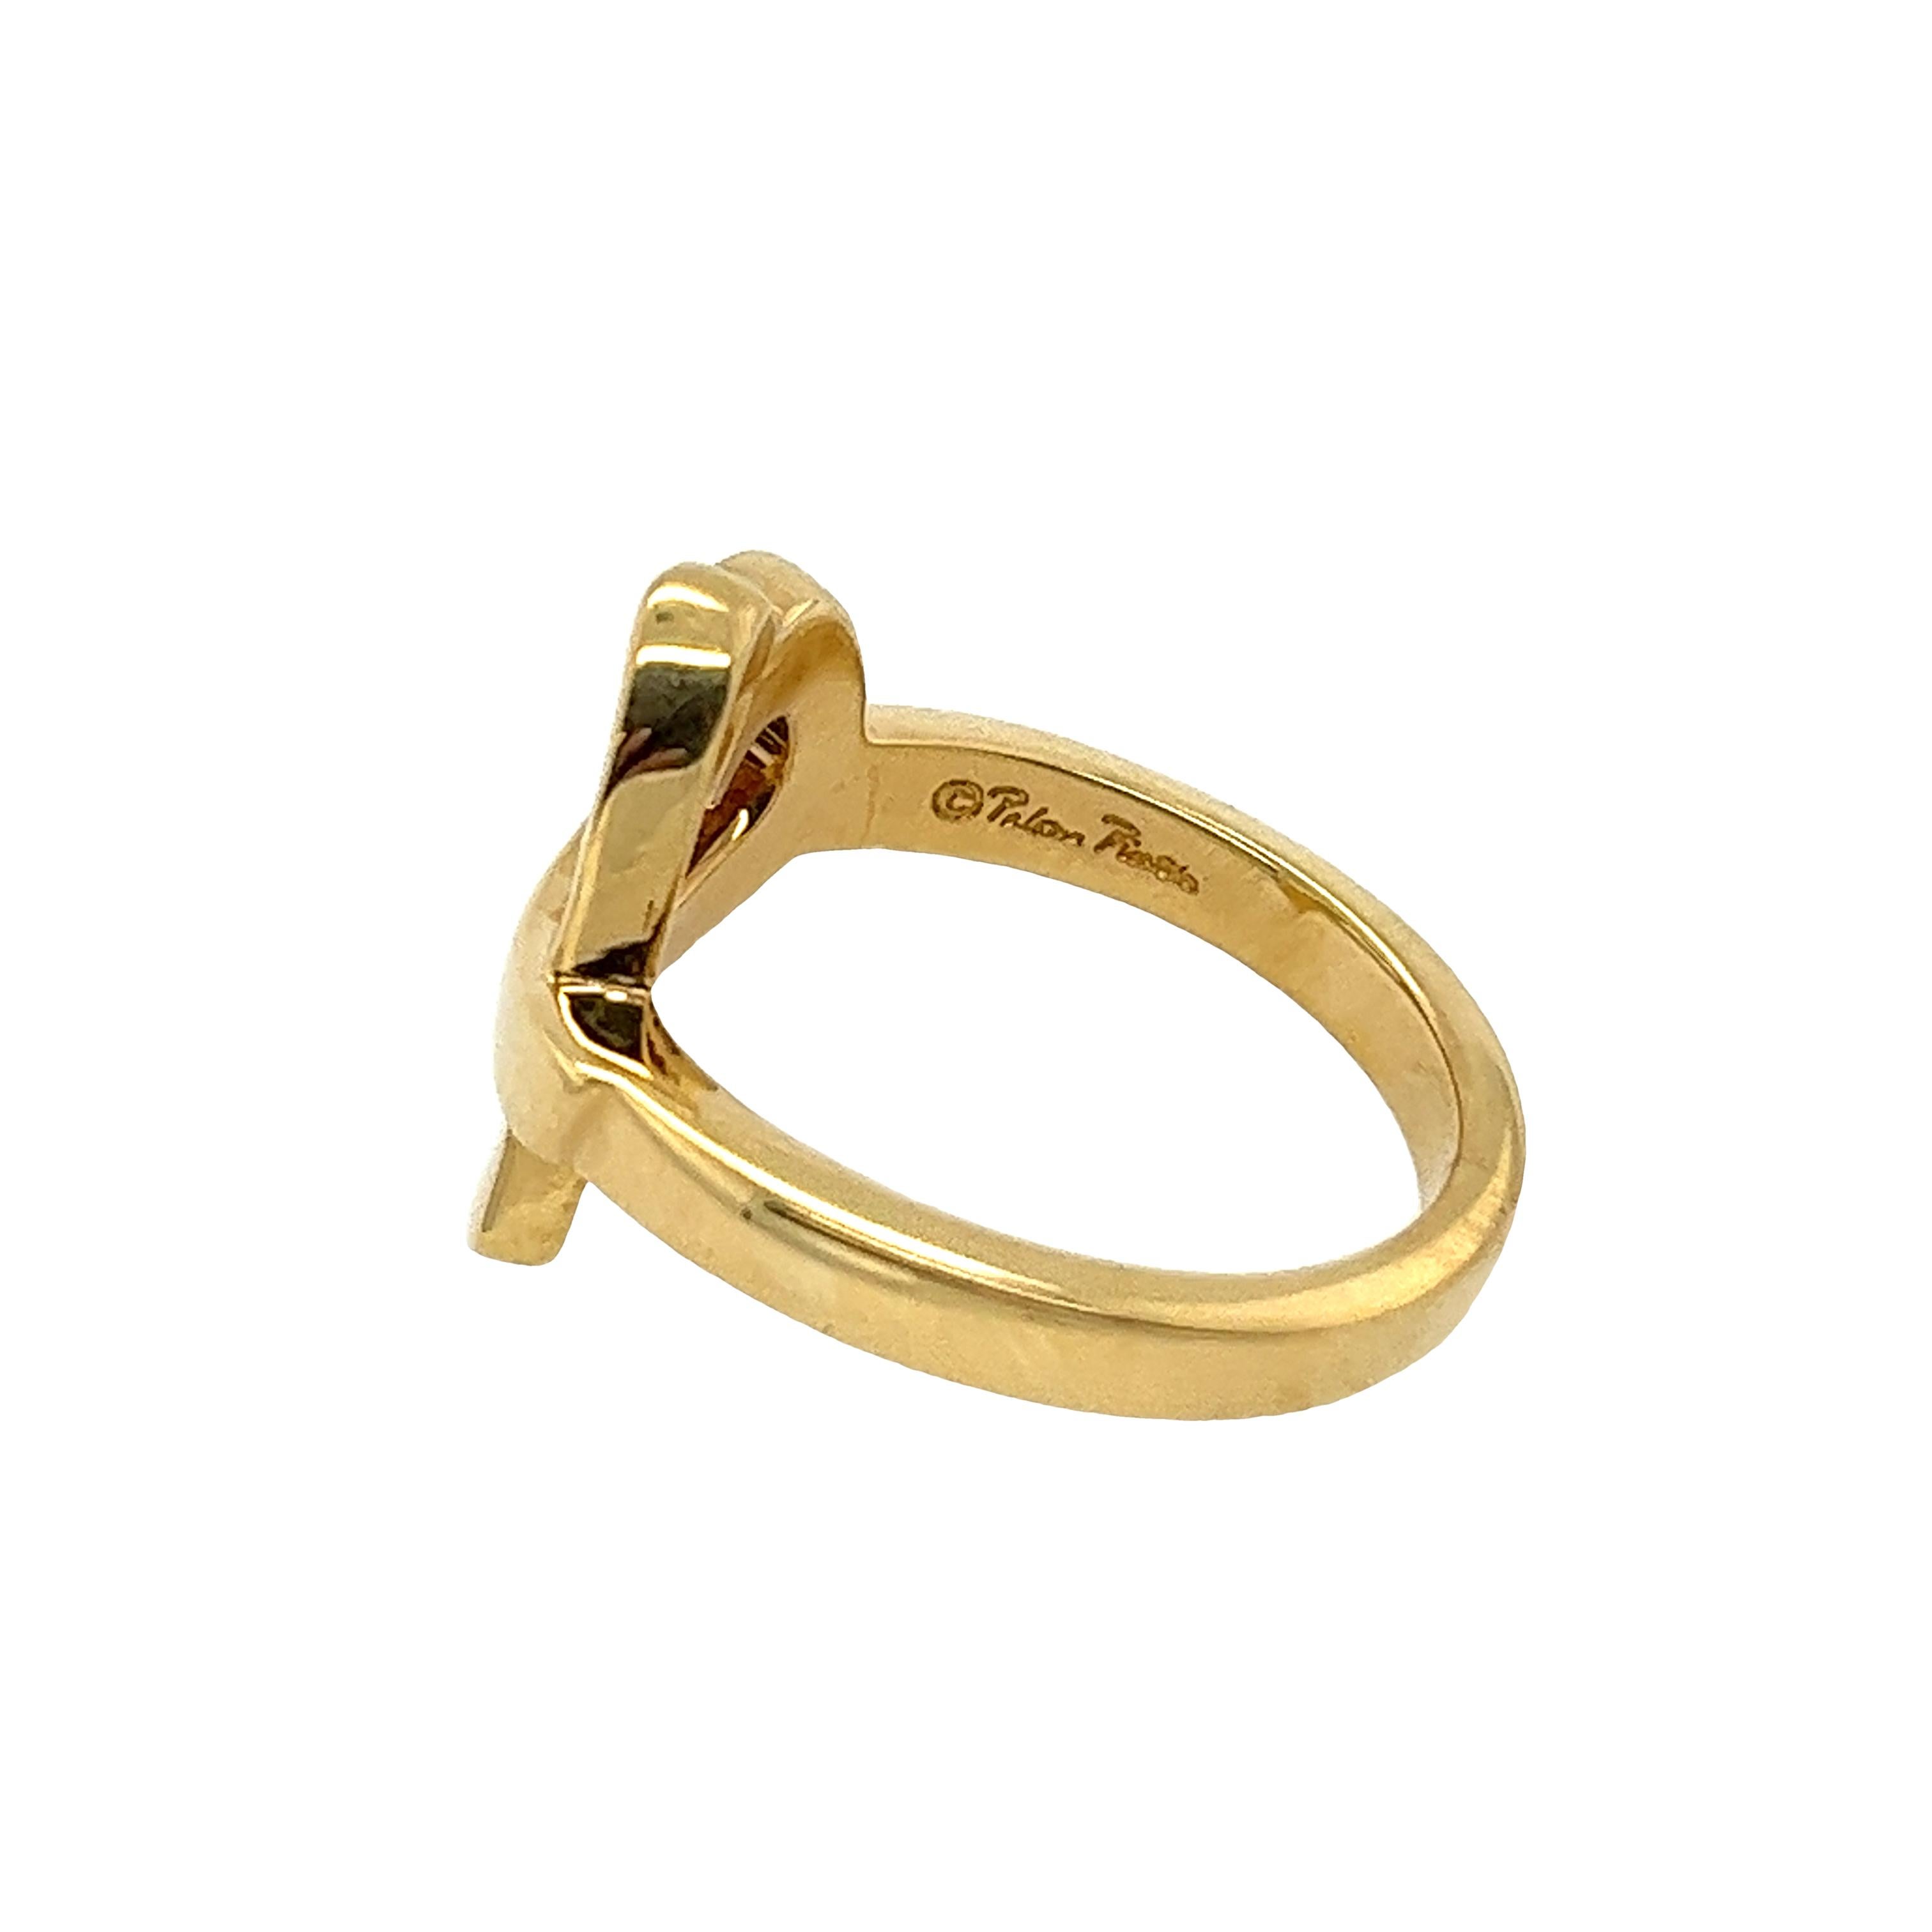 Elevate your jewelry collection with this exquisite Tiffany & Co Love Heart Ring by Paloma Picasso. Crafted in 18ct yellow gold, this stunning ring features a delicate love heart design that exudes elegance and romance.

•	Width of Band: 2.6mm